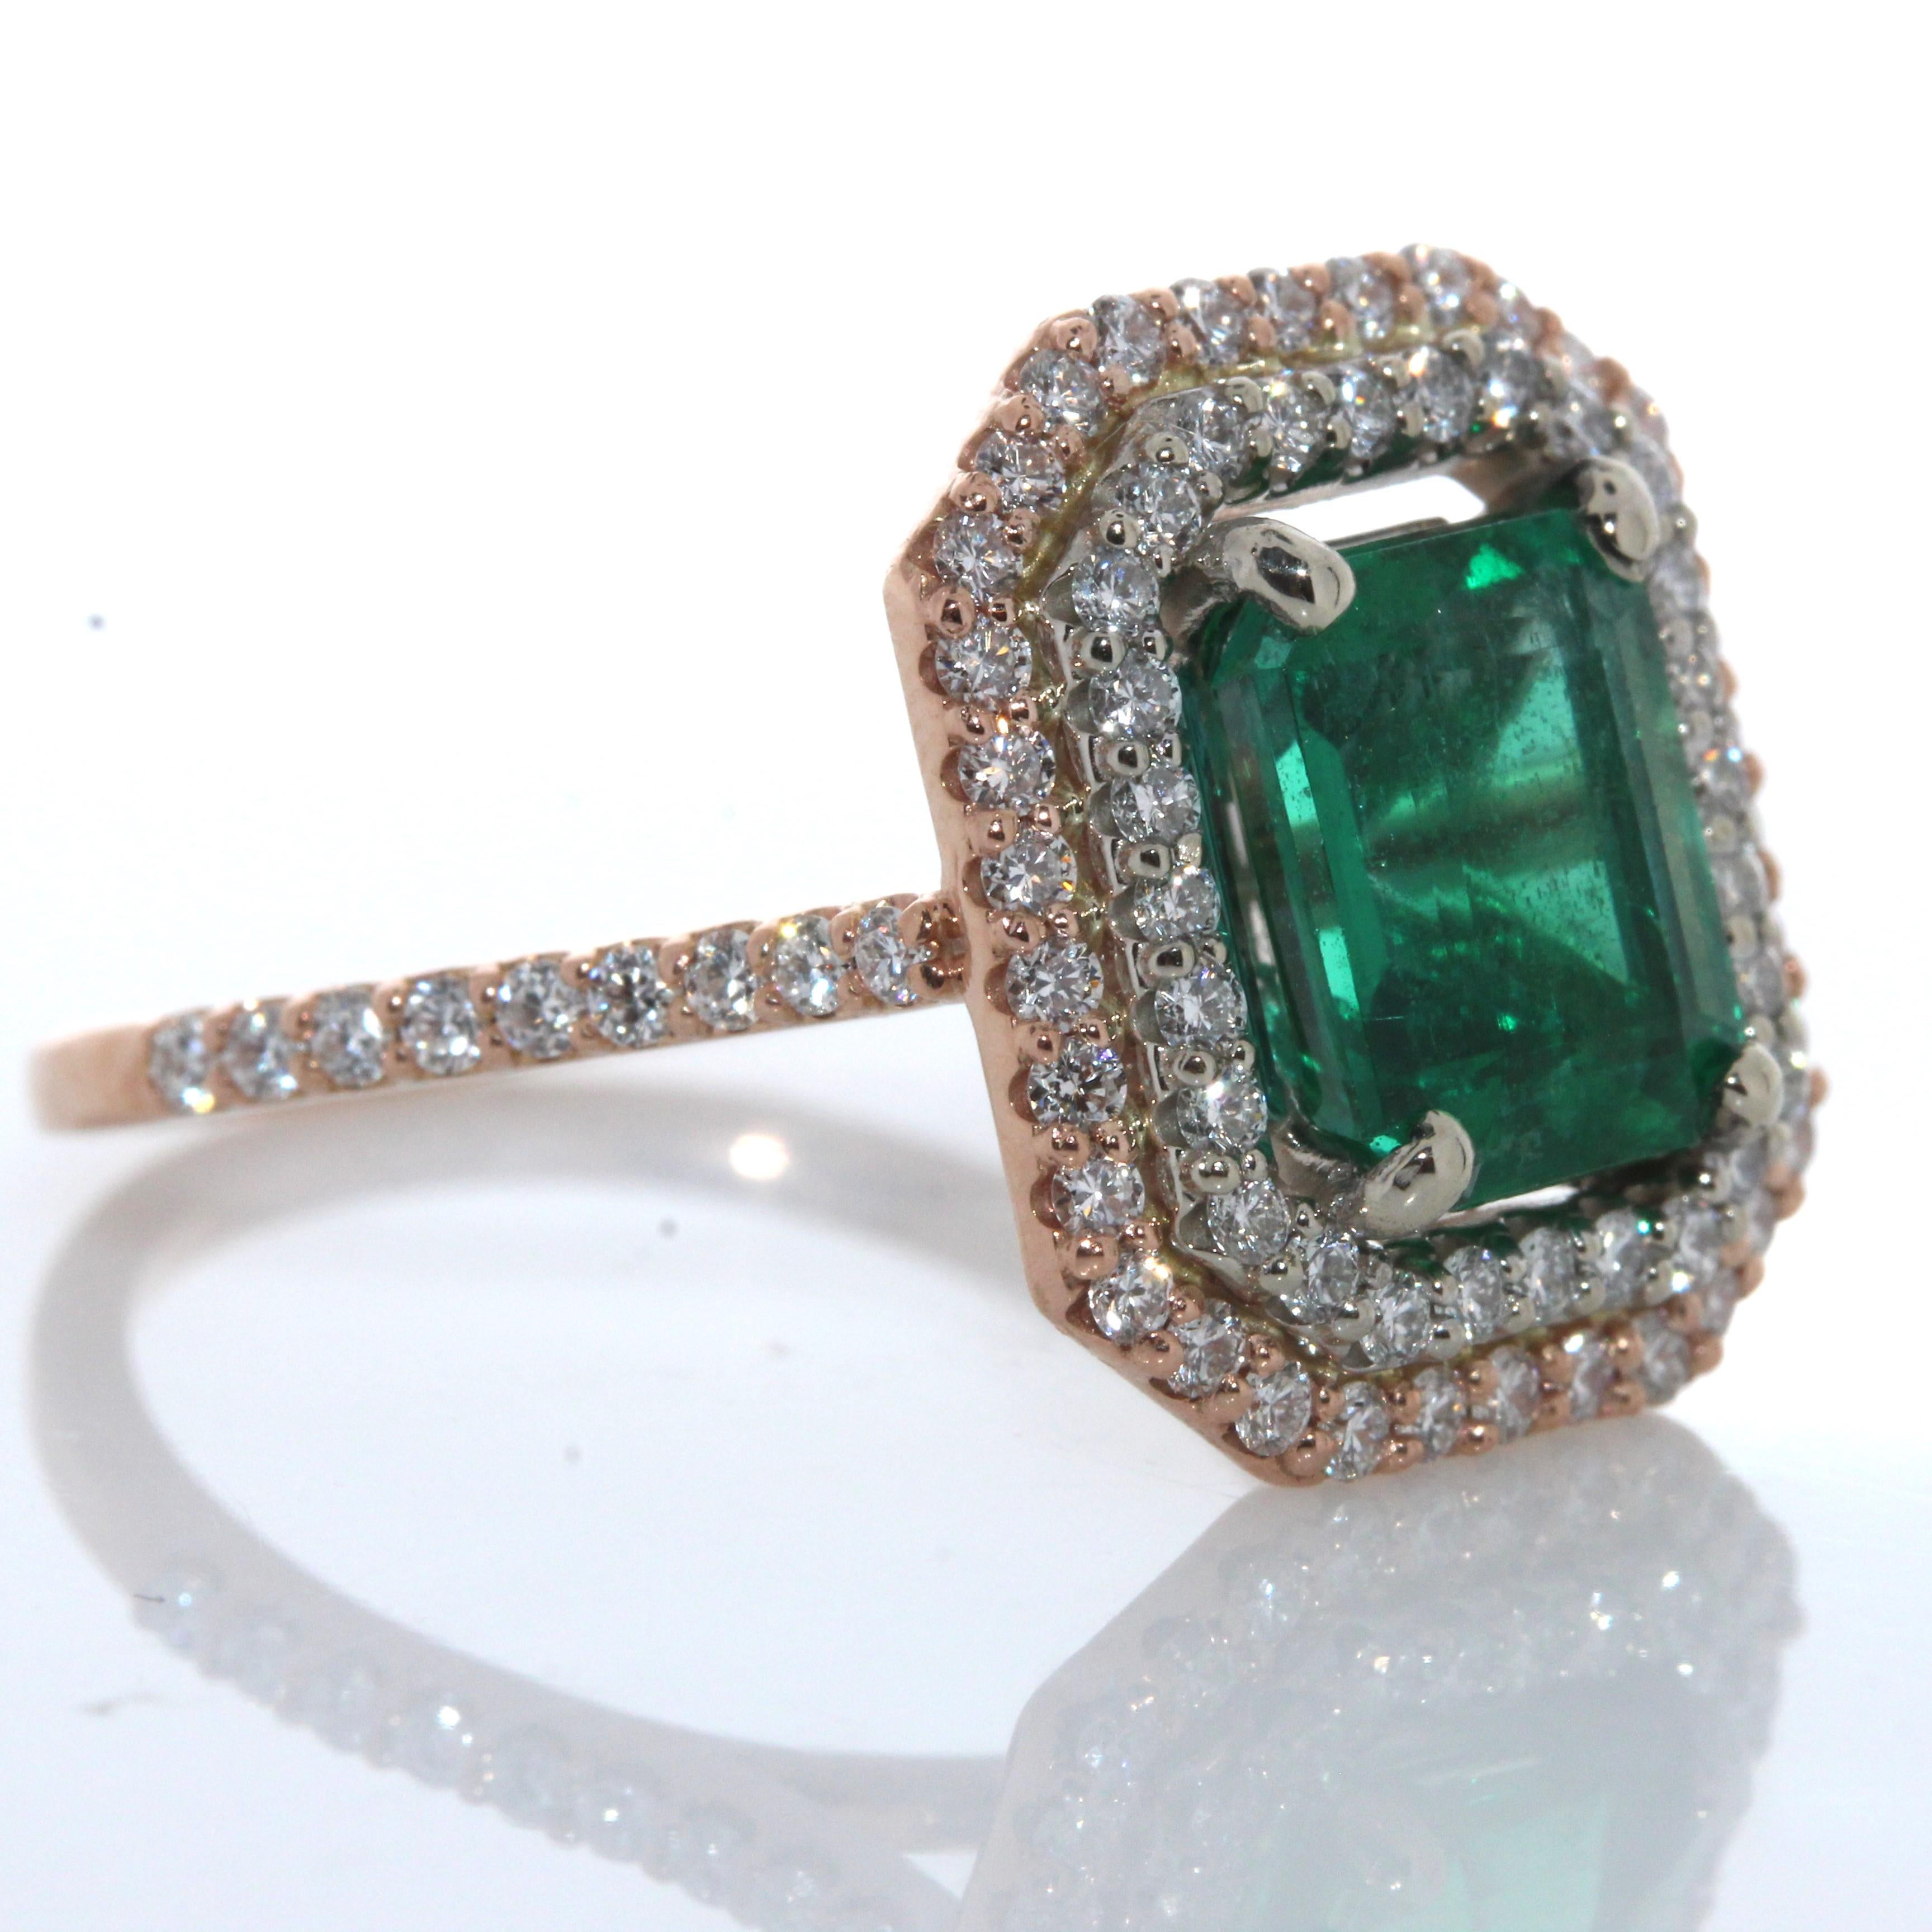 This ring features a spectacular 2.63 carats emerald cut emerald. Would you look at this beauty! Simple in design, but there is nothing ordinary about the gorgeous color of this breathtaking green emerald ring. The 1.20 carat total weight of 80